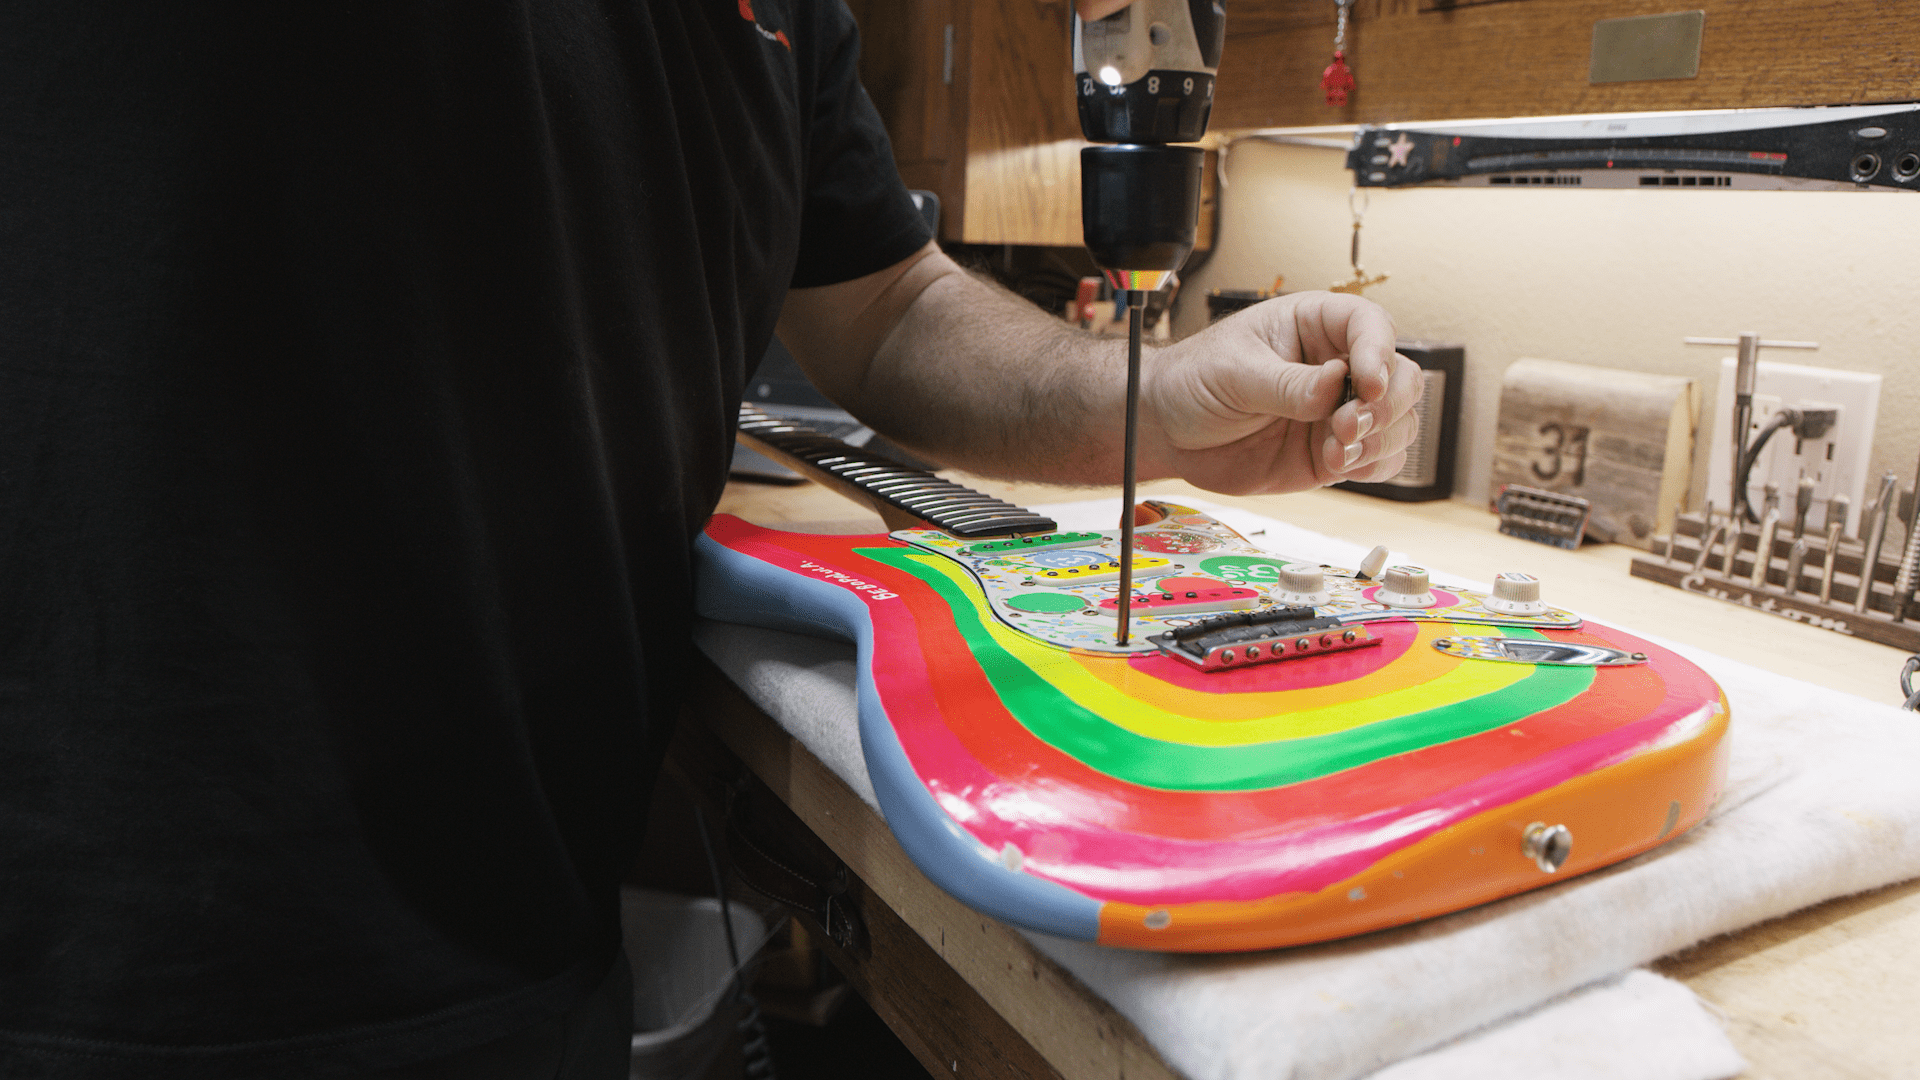 Recreation of George Harrison’s “Rocky” Stratocaster in the making 